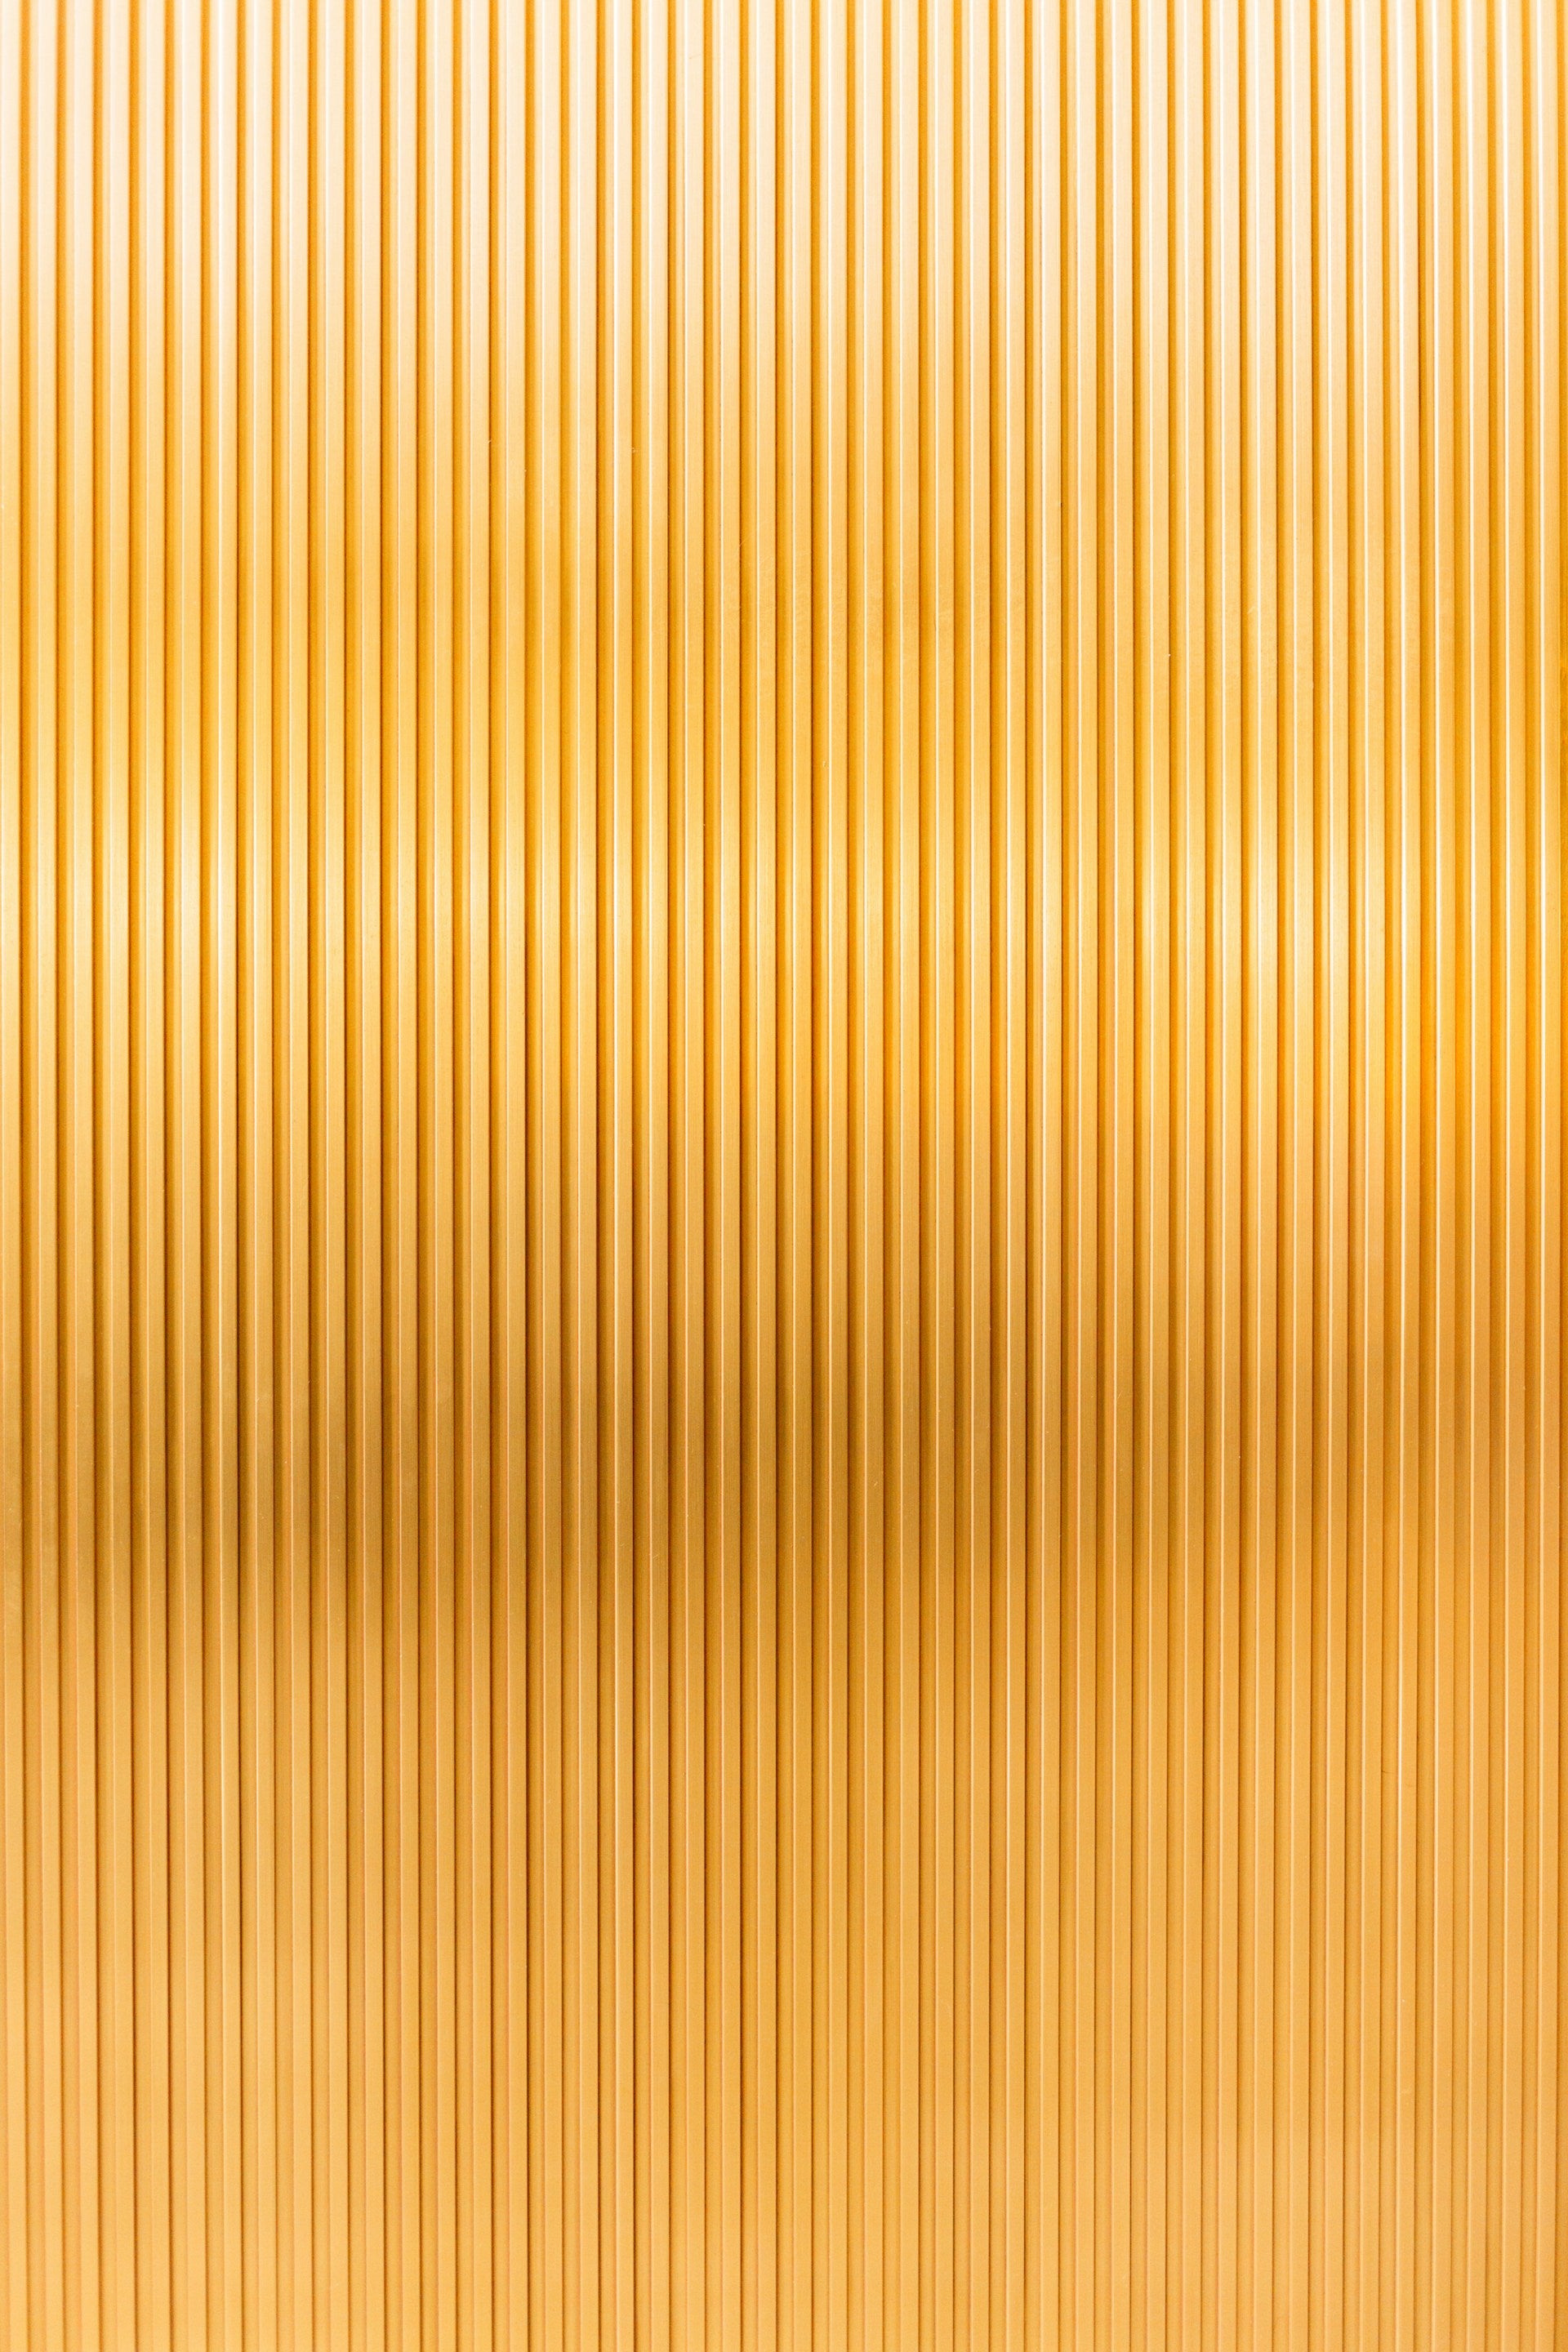 A gold metal surface with thin paneling. 